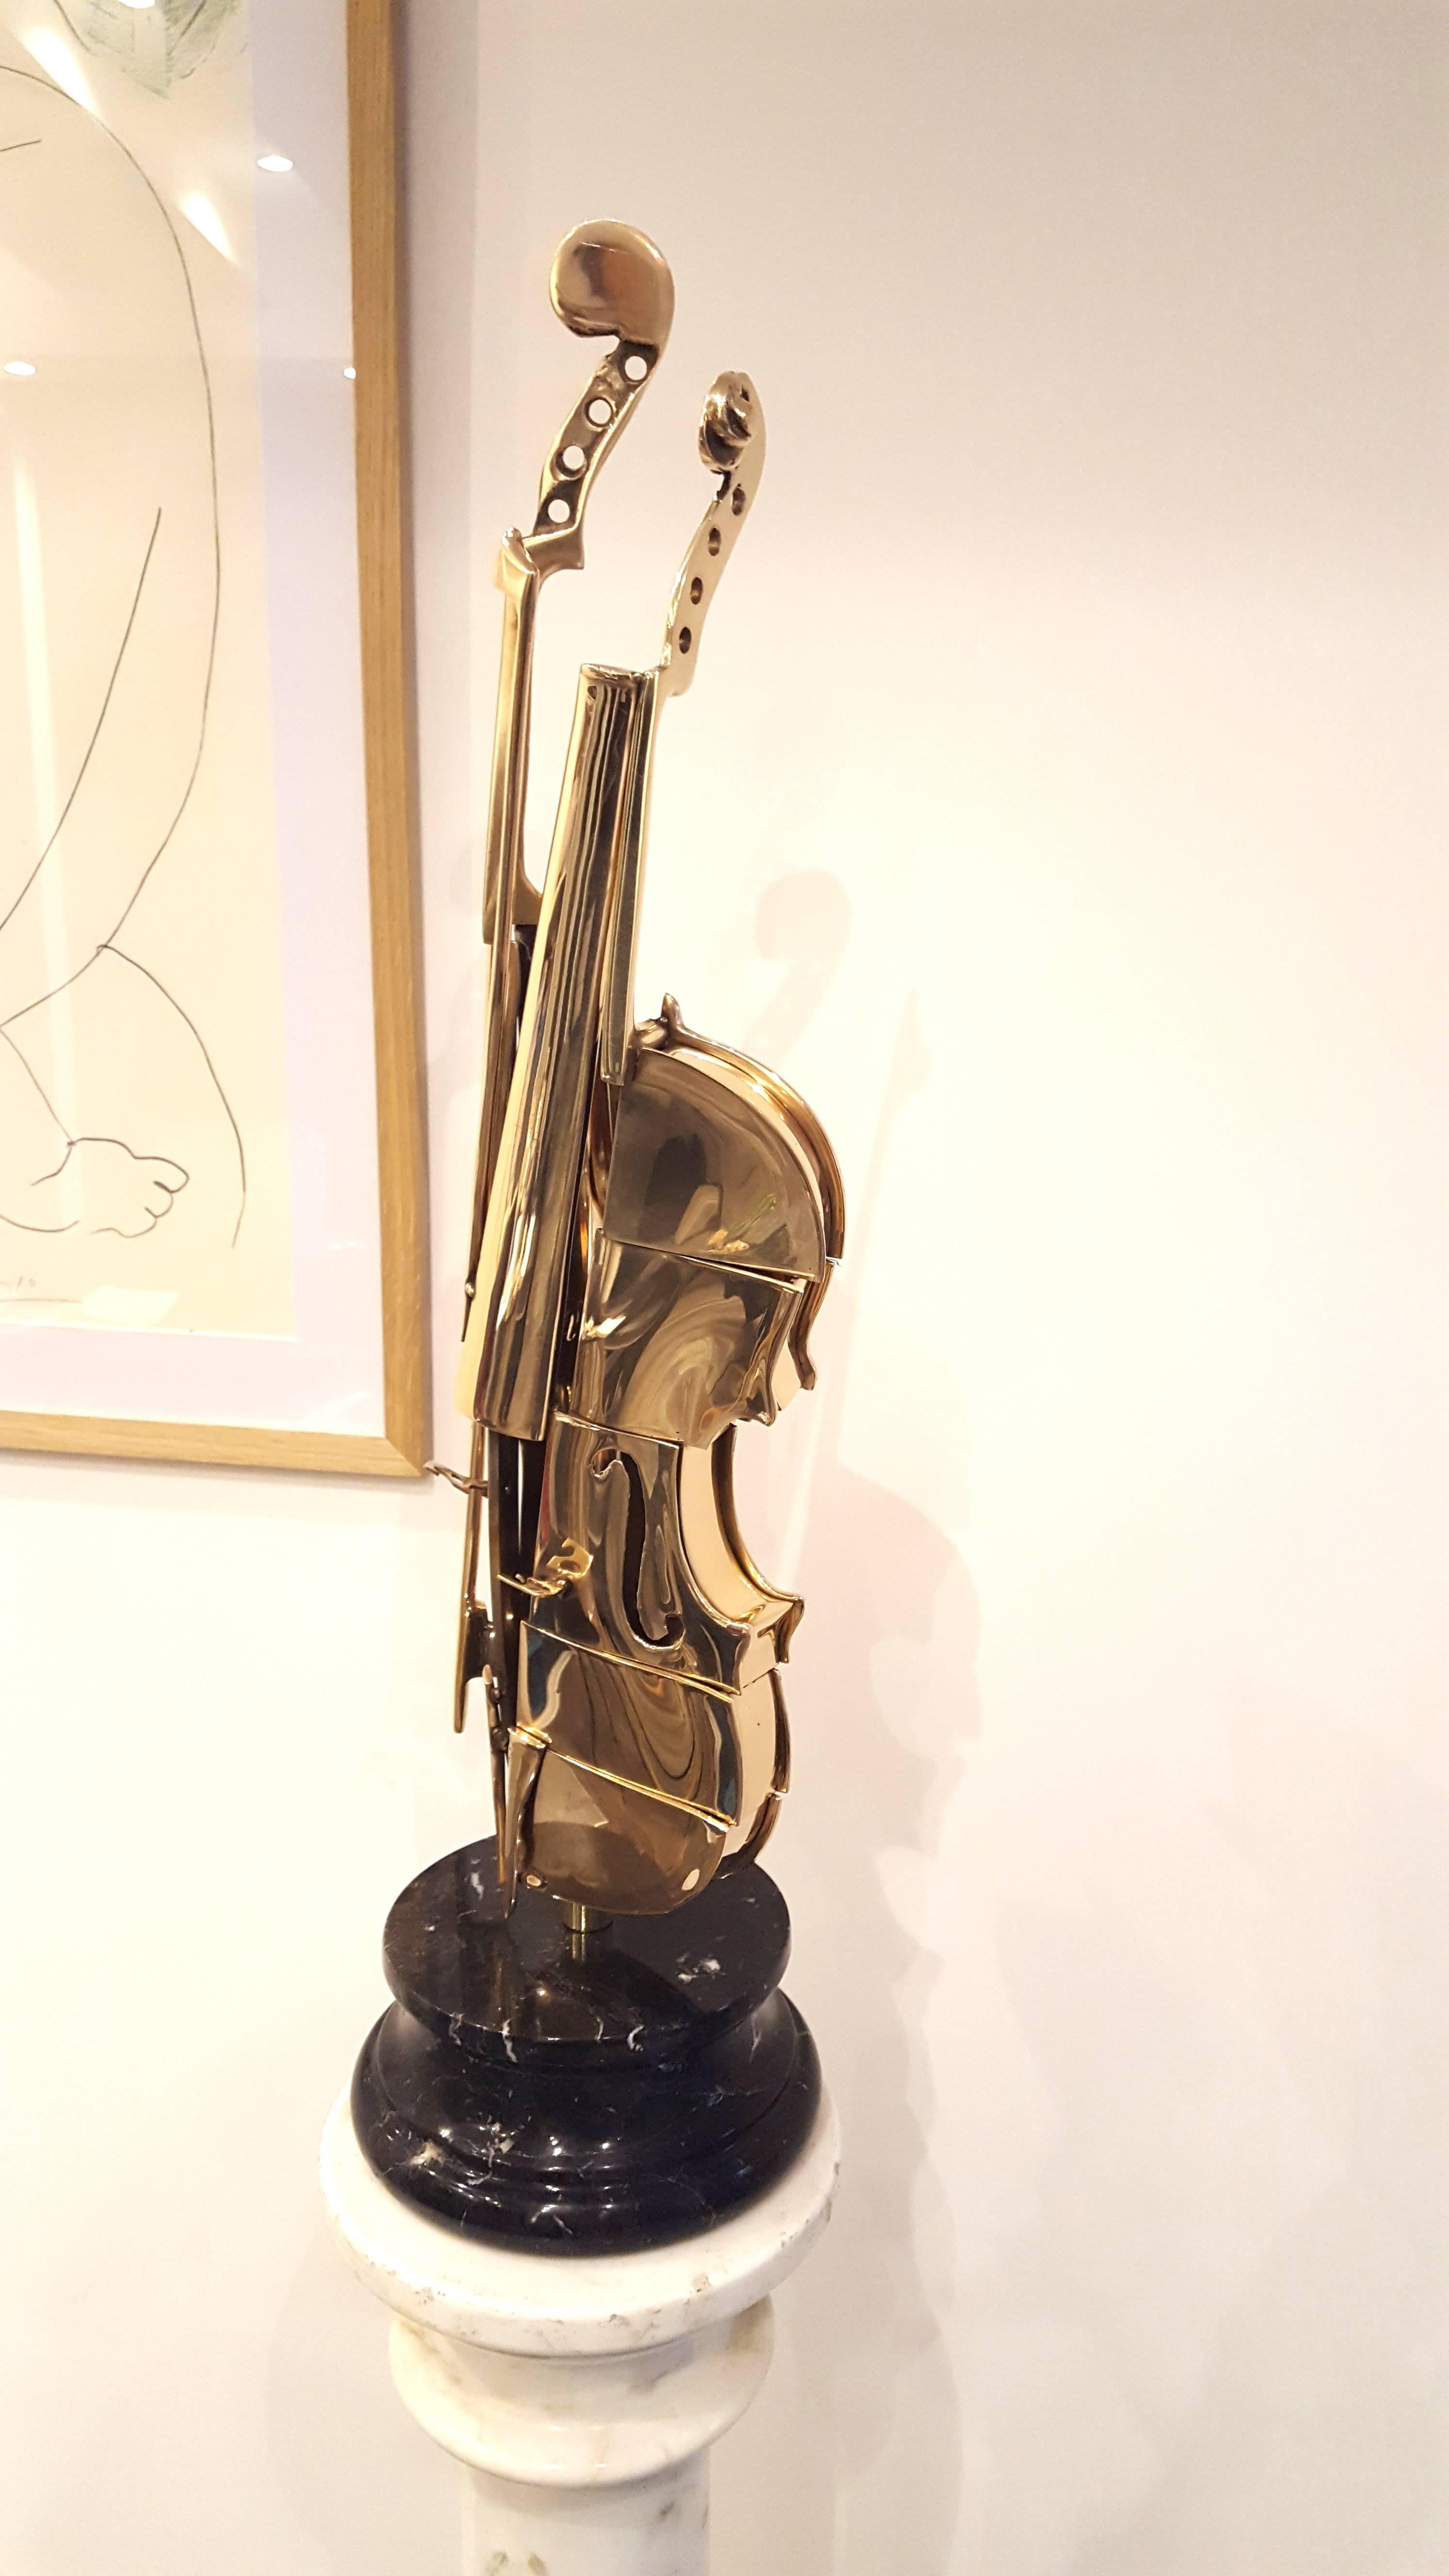 Original Signed and Numbered Bronze Violin Sculpture by Arman
Title: Pizzaiola
Signed and Numbered
Edition: EA 8/20
Bronze Sculpture on Black marble base
Dimensions: 70 x 20 x 20 cm

Arman is a painter who moved from using objects for the ink or